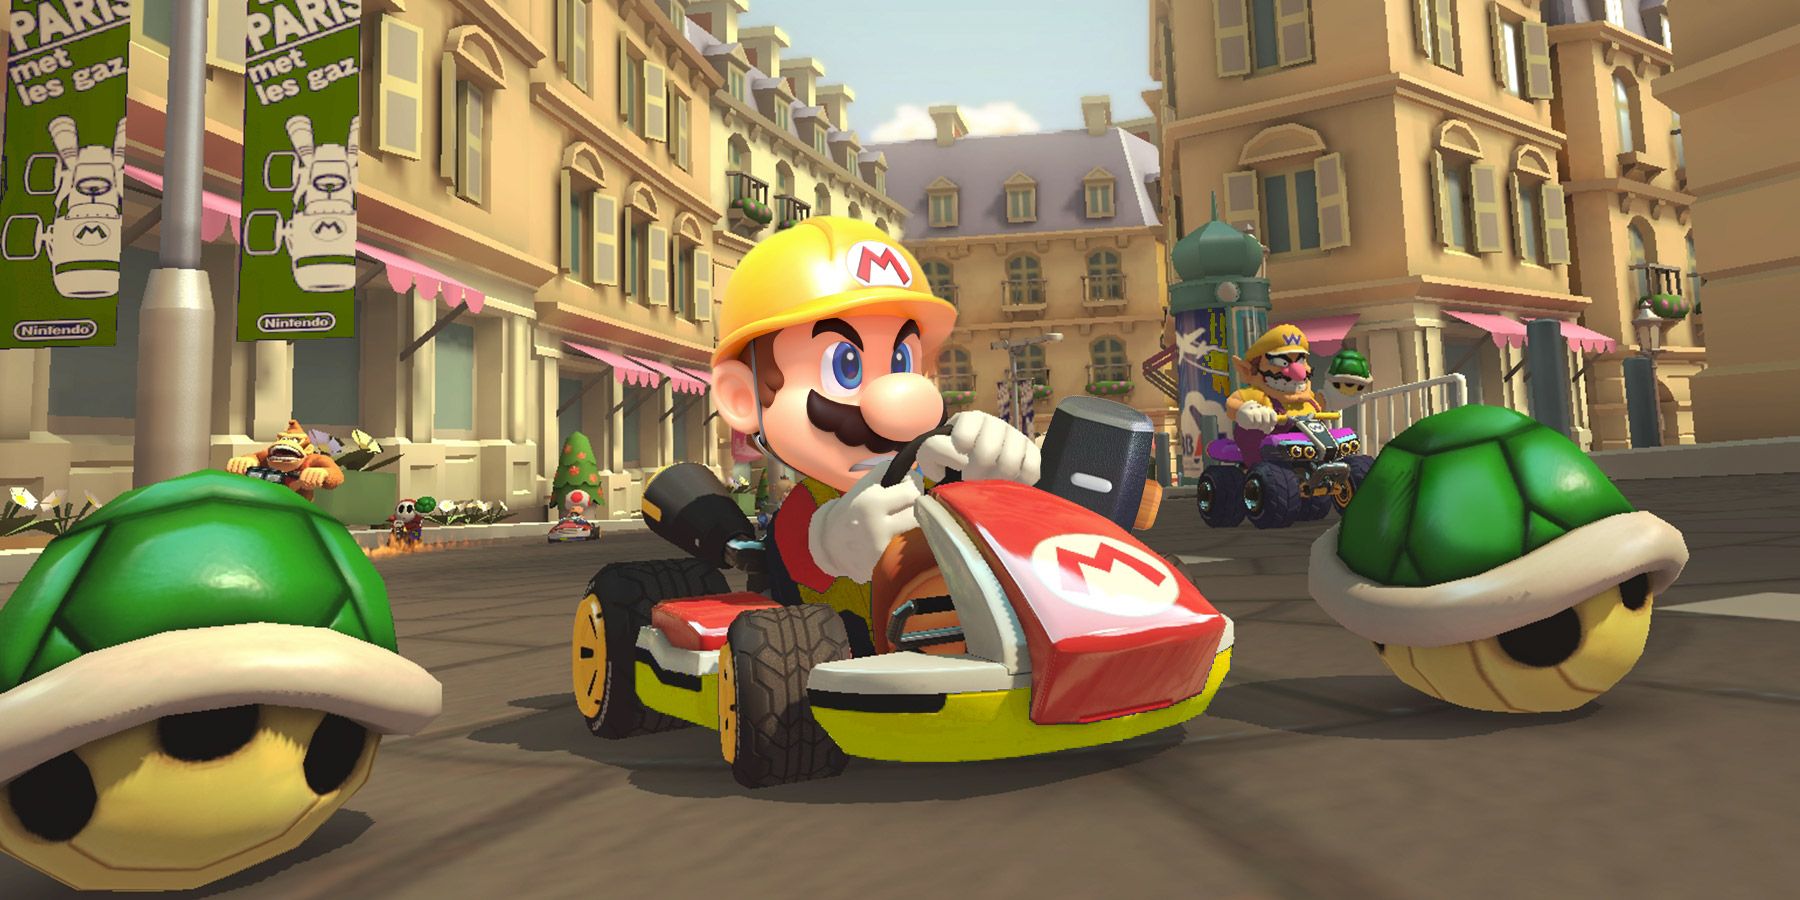 Mario driving a kart in the street by two green shells and Wario in the background in Mario Kart 8